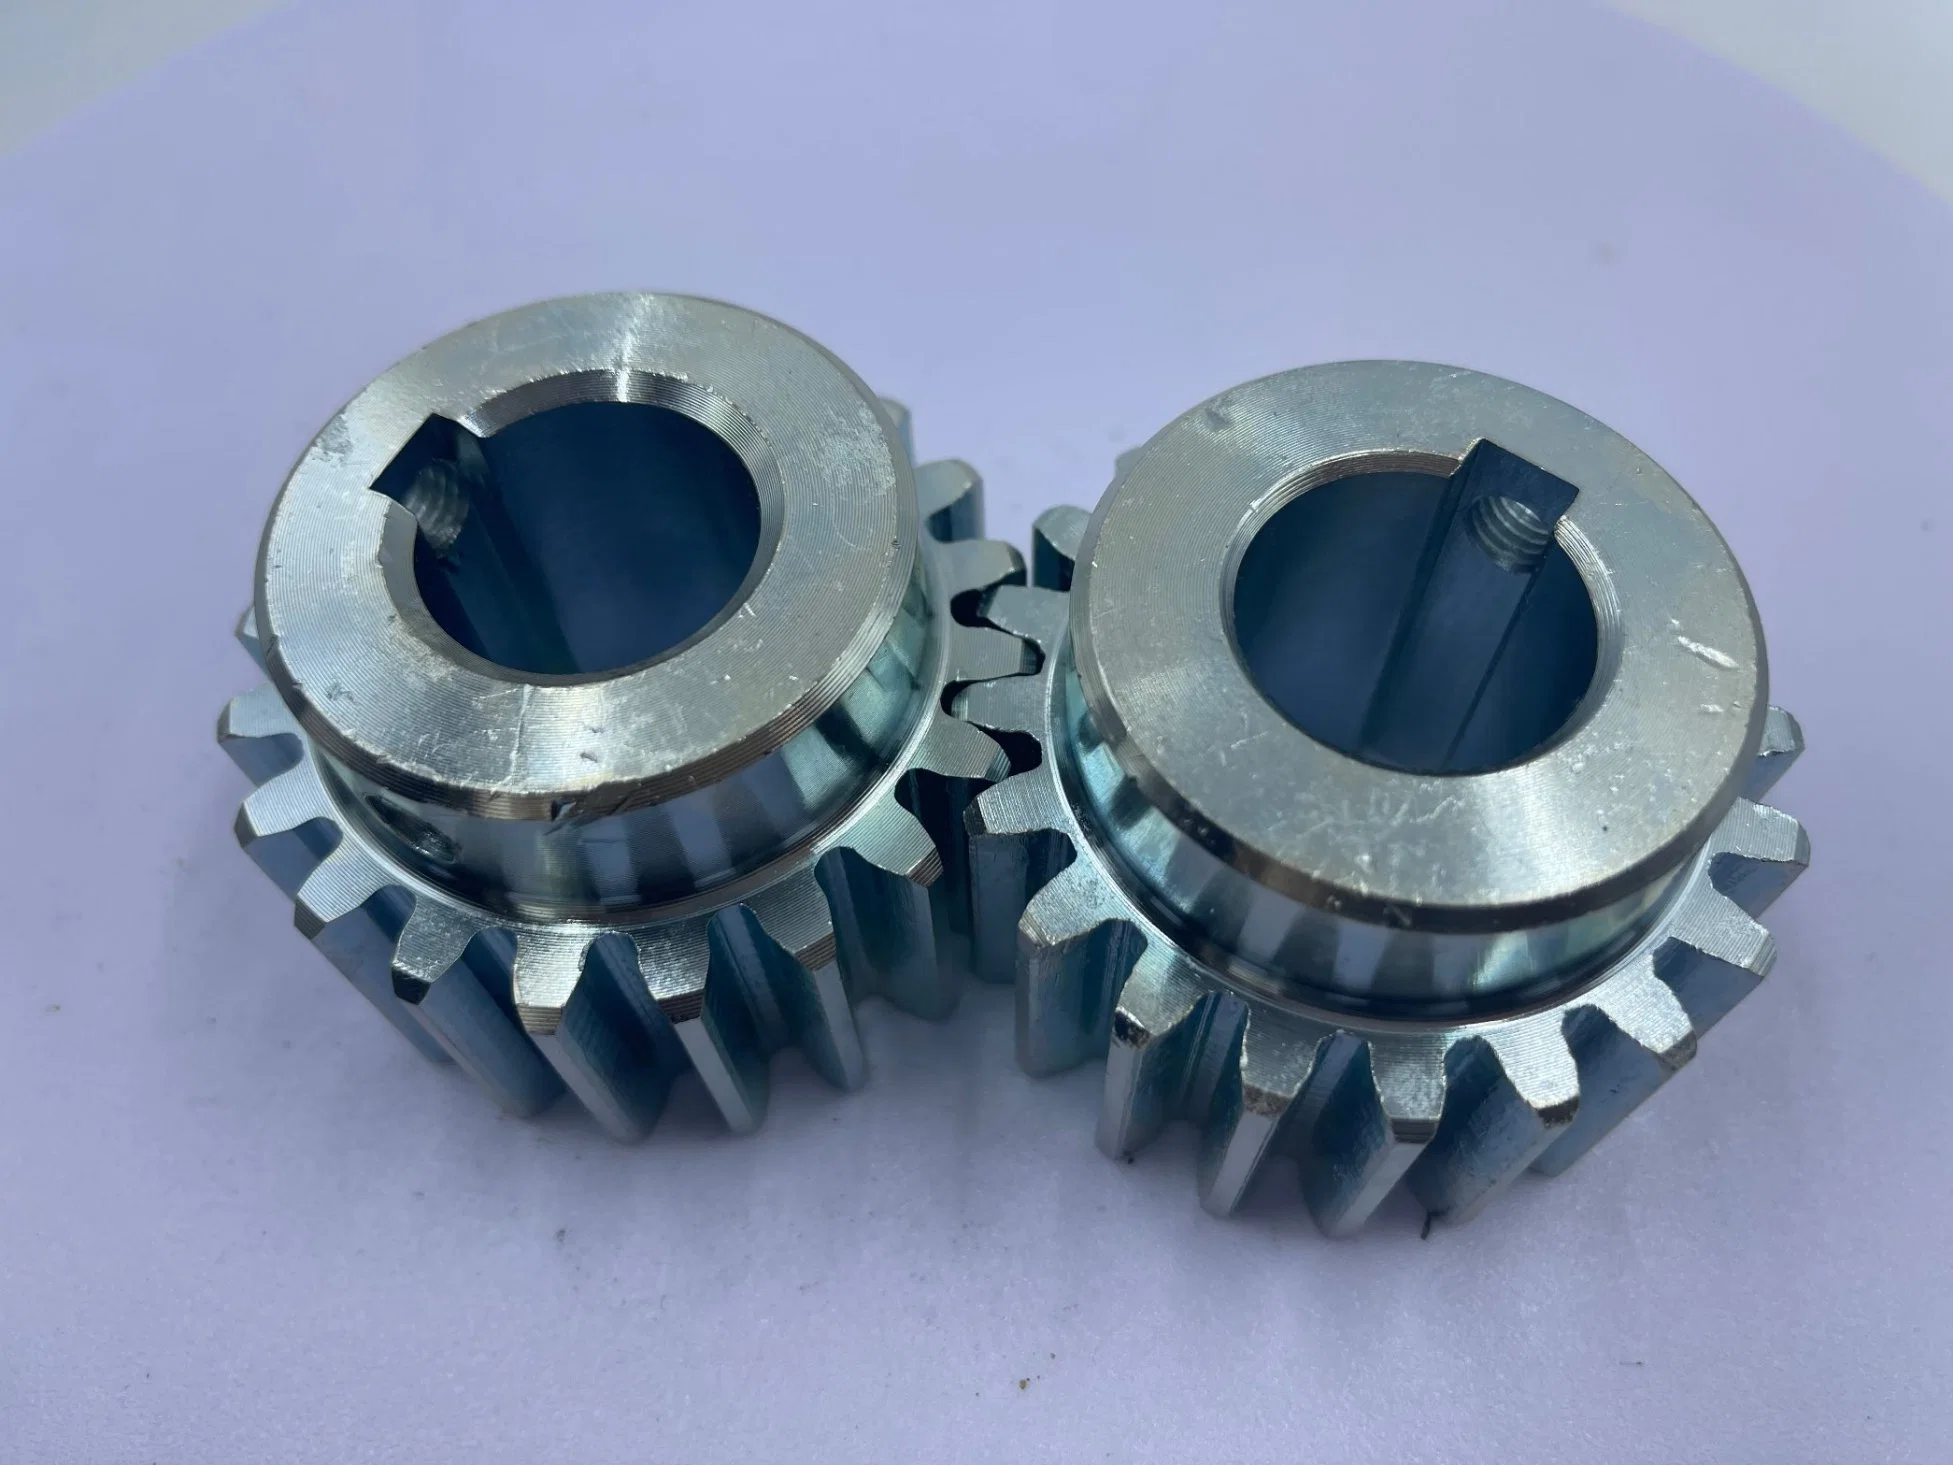 High Precision Grinding of Hard Tooth Surface Spur Gear for Machine Tools, Lathe Machining, Boring, Grinding, Drilling, Broaching